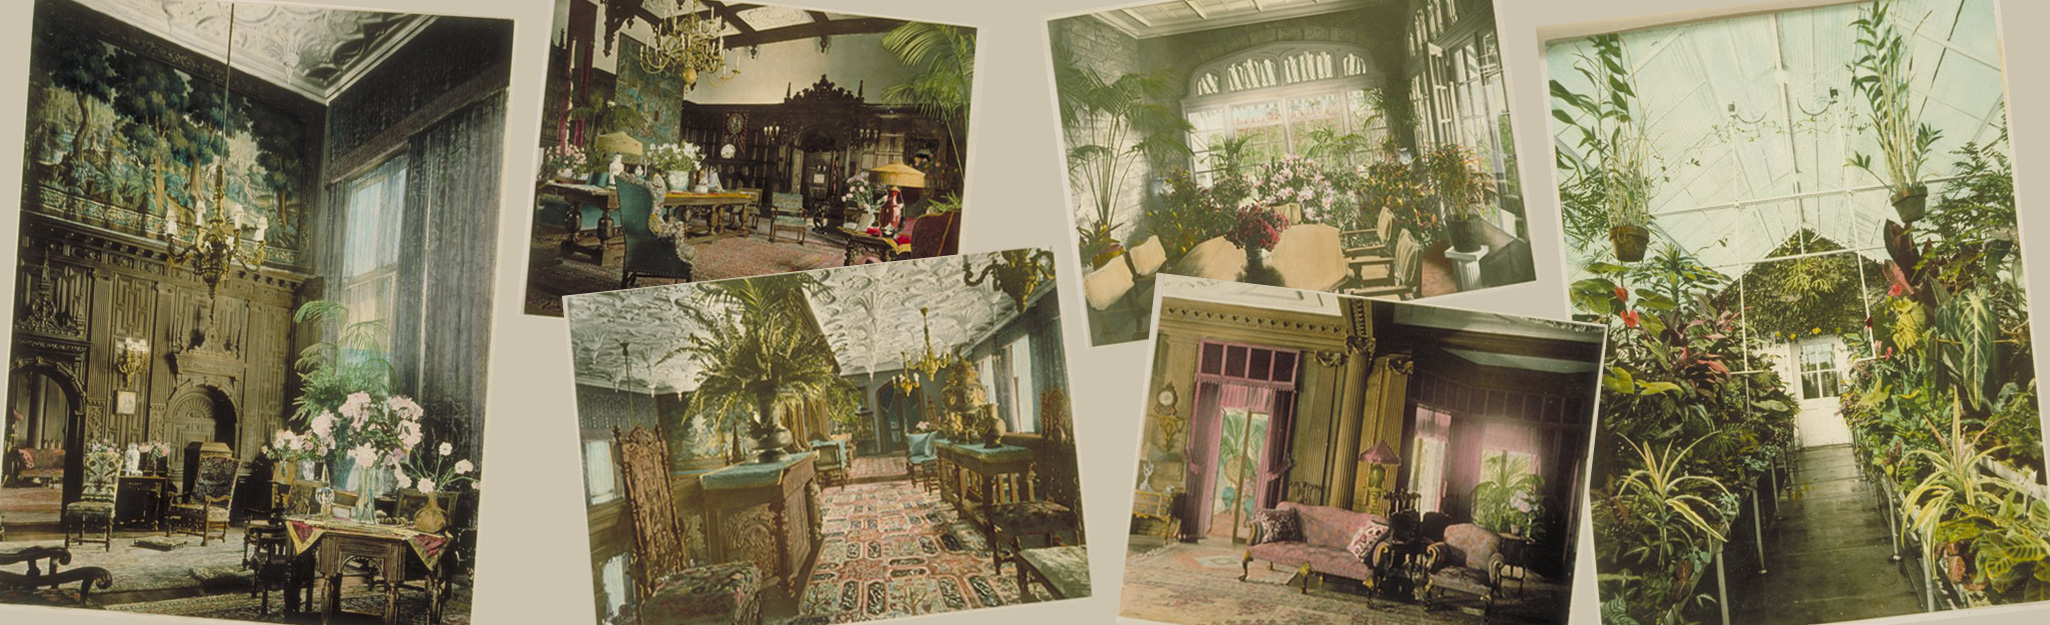 A collage of historic photos of the inside of the Branford house, circa 1915